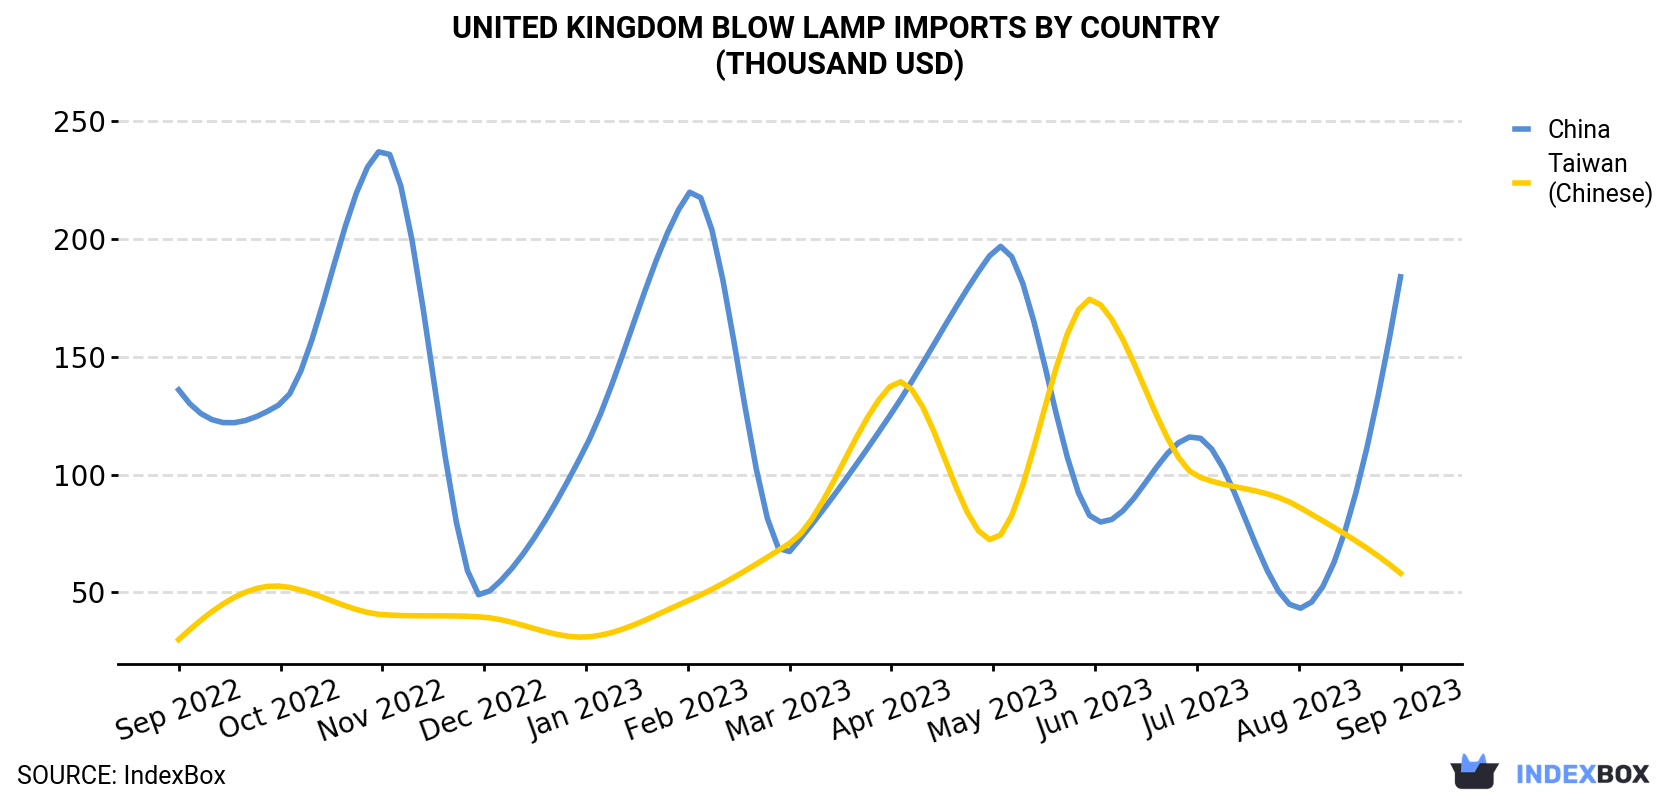 United Kingdom Blow Lamp Imports By Country (Thousand USD)